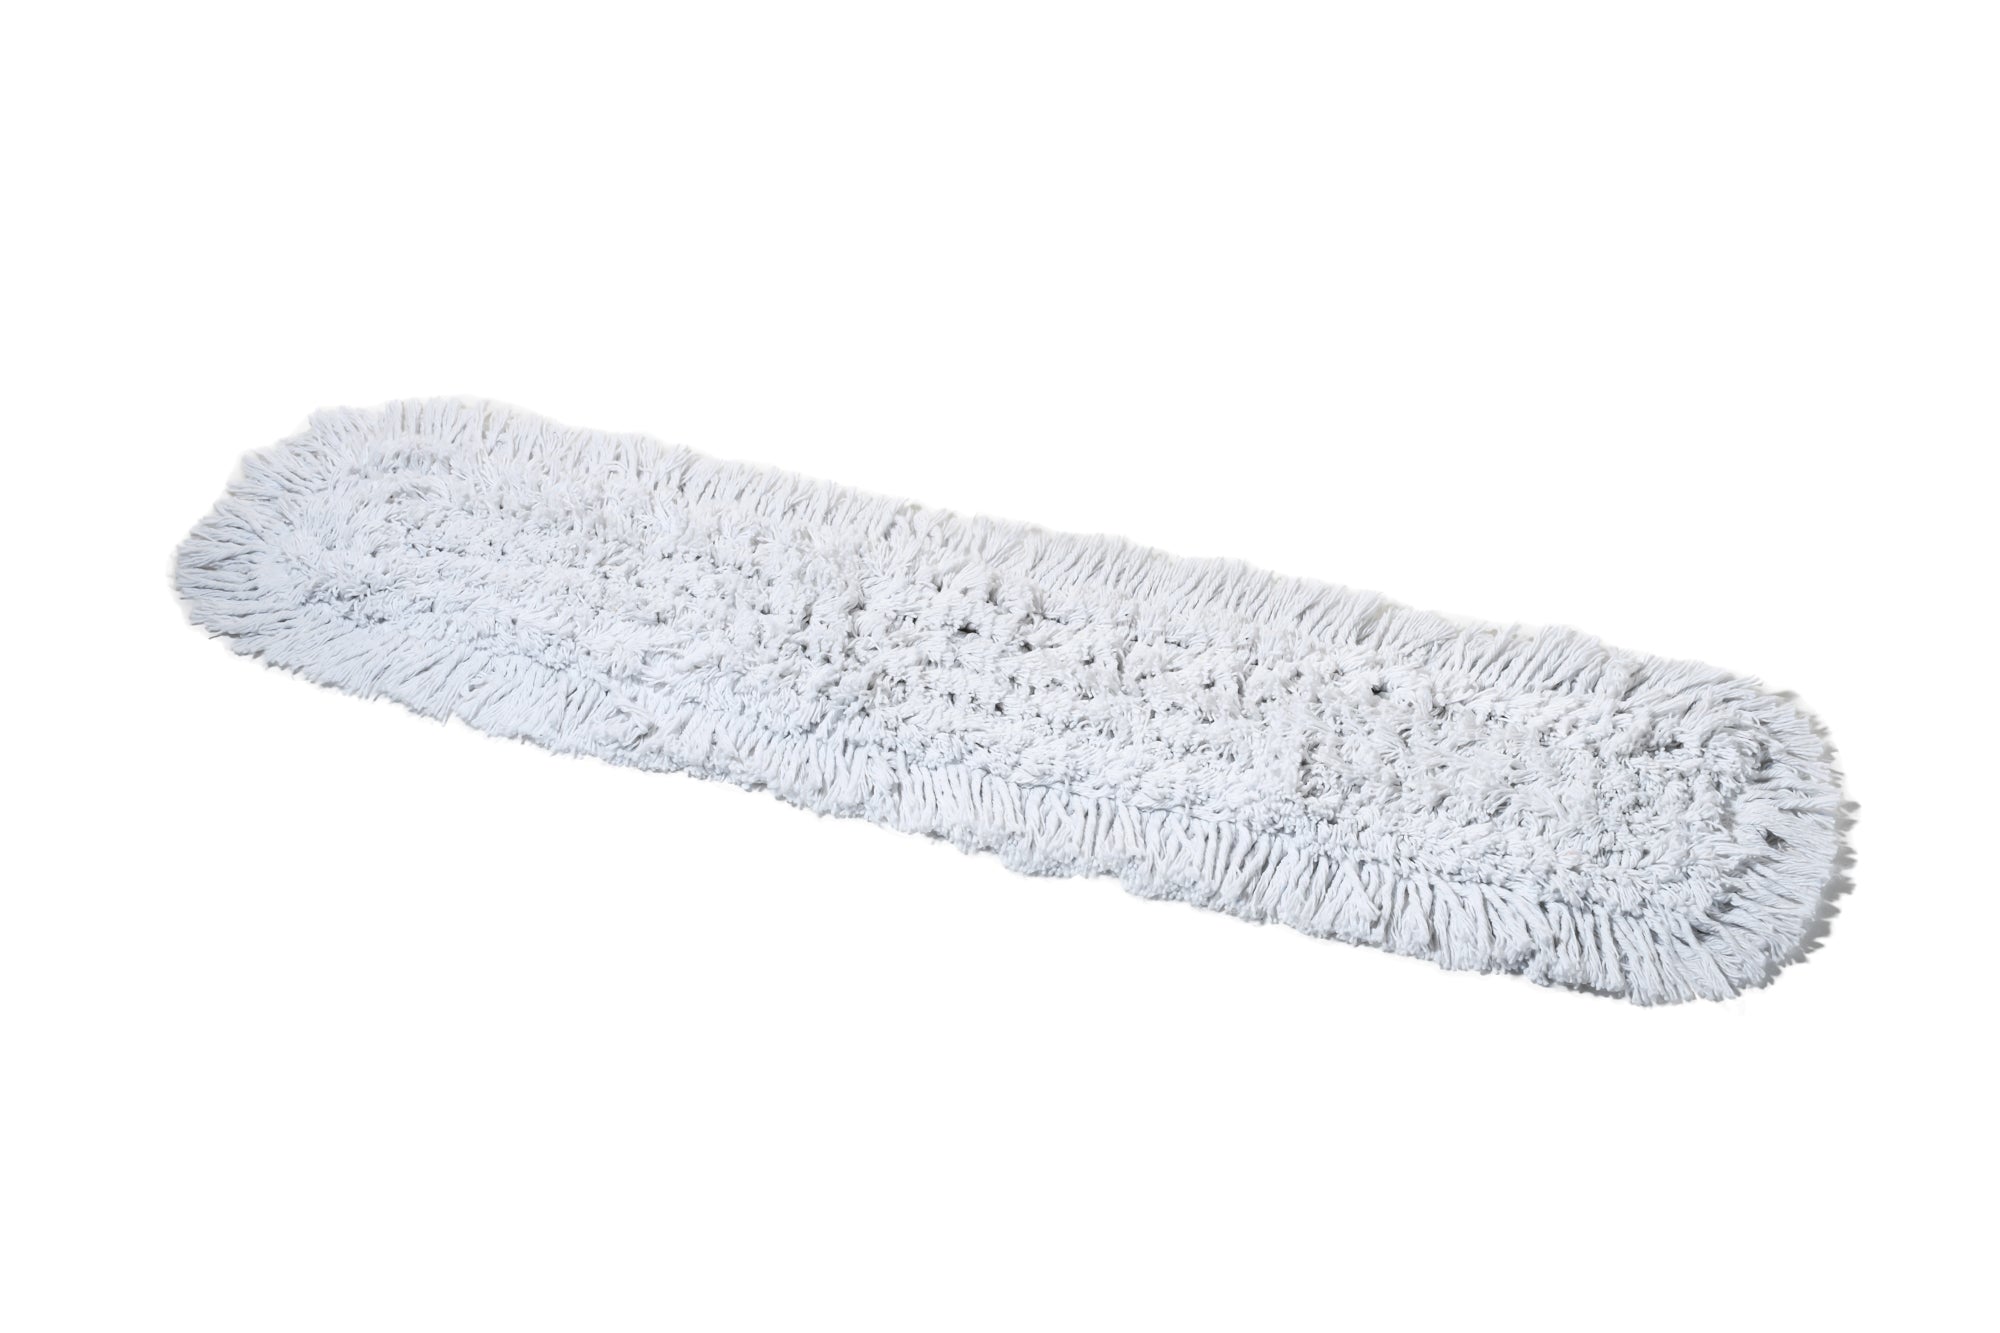 Tidy Tools 48 Inch Cotton Dust Mop Refill